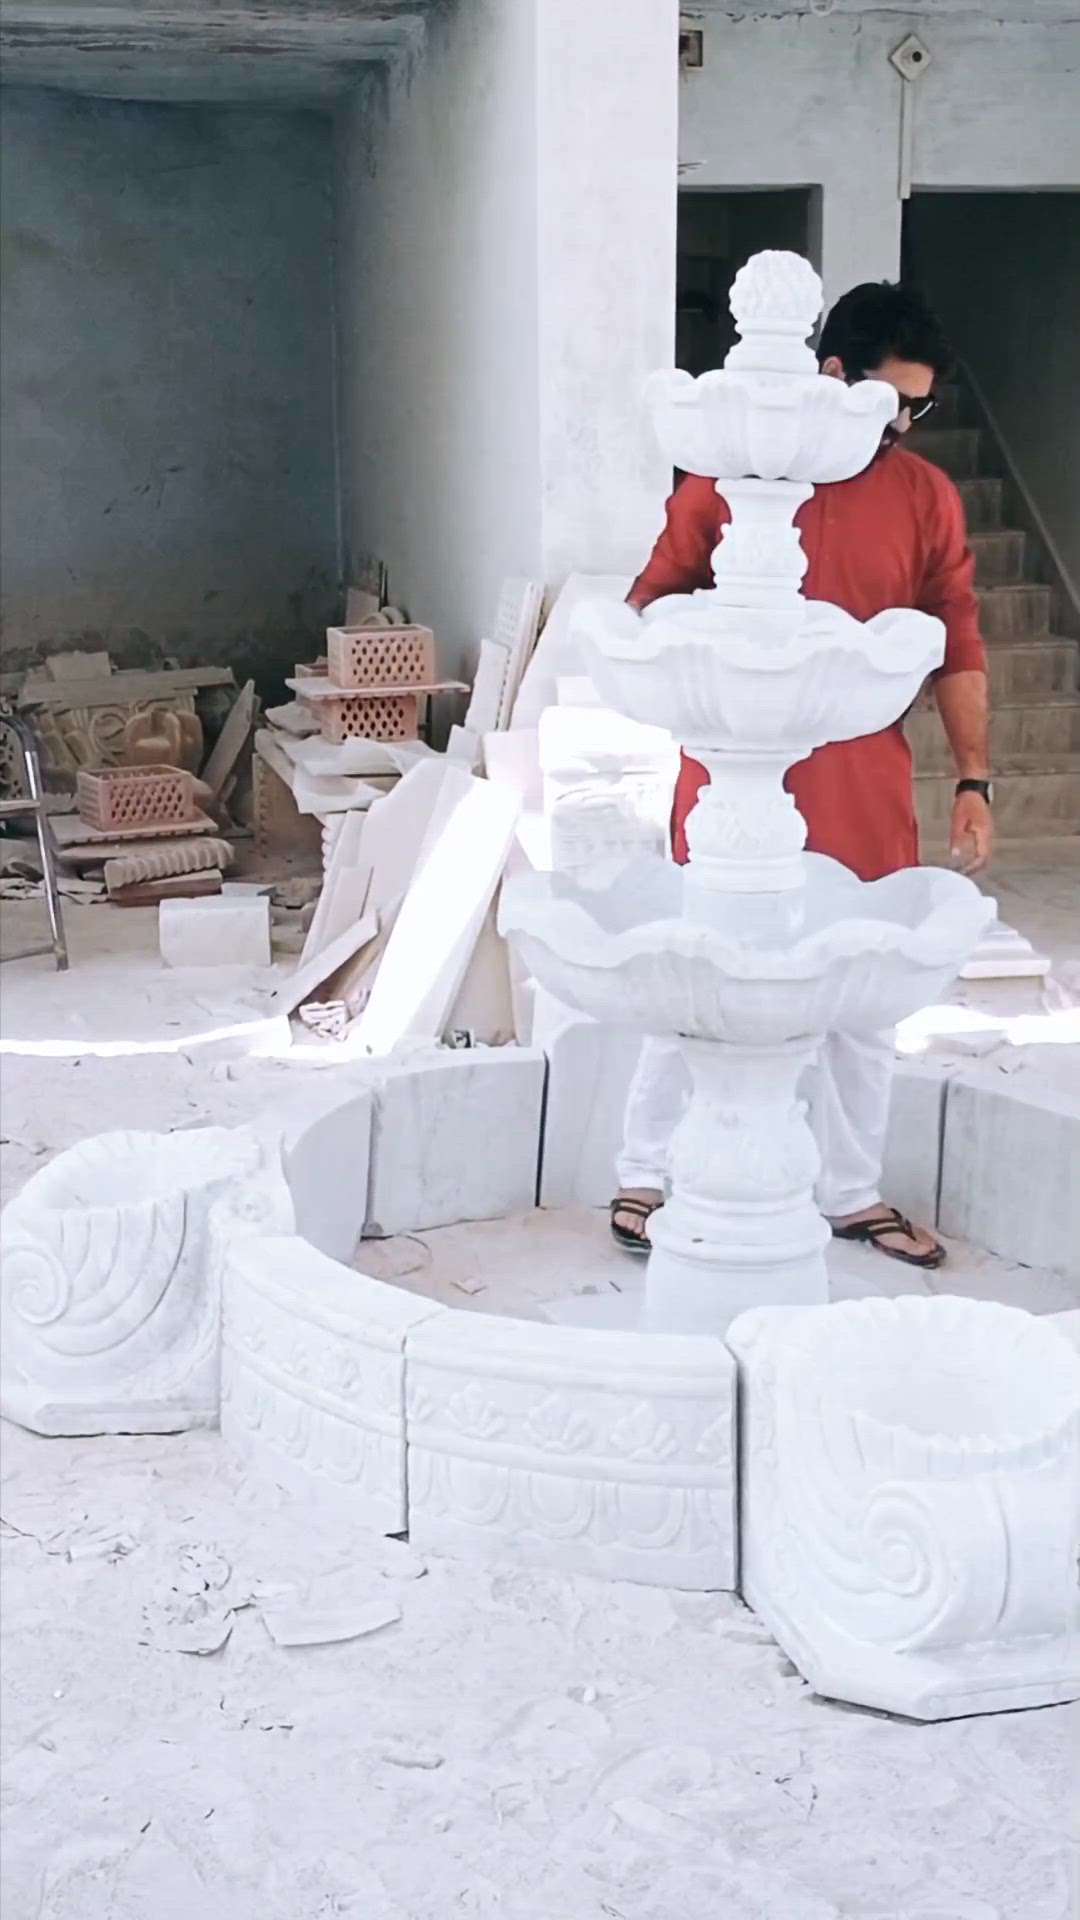 Kumari Marble Fountain in Rajasthan 

Indoor Marble and stone Fountain, Marble Water Fountains. Marble Water Fountains

Decor your garden with beautiful fountain 

We are manufacturer of marble and sandstone fountain 

We make any design according to your requirement and size 

Follow me @nbmarble 

More information contact me 
8233078099
.
.
.
.
.
.
#kumarimarble #fountain #fountainwork #nbmarble #waterfountain #marblefountain #stonefountain #whitemarble #sandstonefountain #gardendecor #gardenfountain